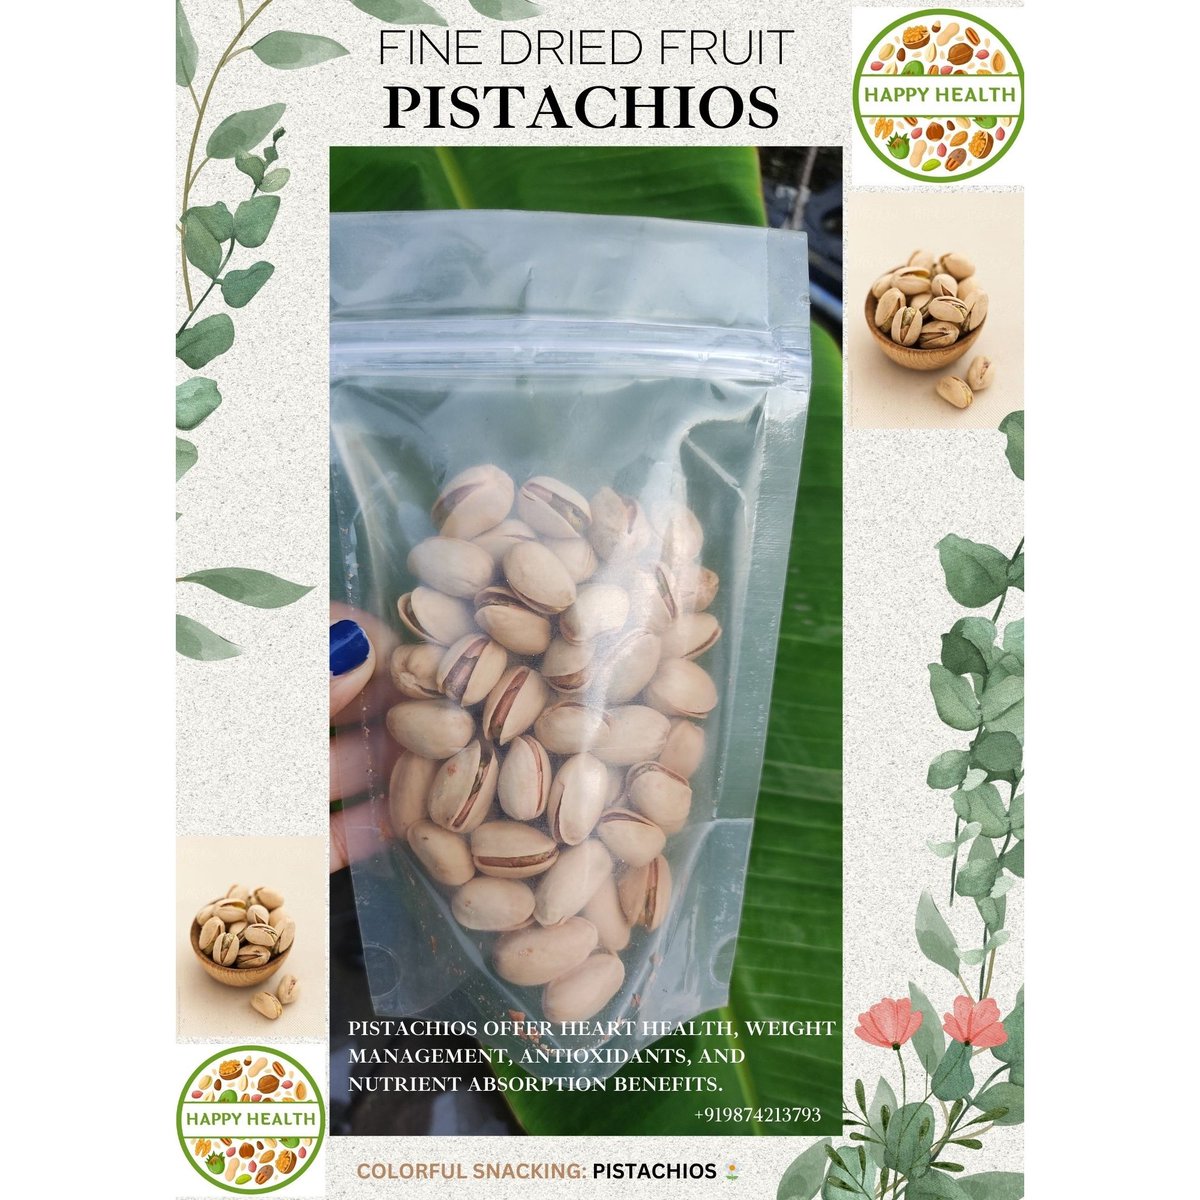 Order Now and Savor the Benefits of Pistachios! 
+919874213793
Craving a healthy and delicious snack? Pistachios are the answer! Packed with nutrients and flavor, they're perfect for anytime munching. Don't miss out – place your order today!  #pistachiolove #healthysnacking